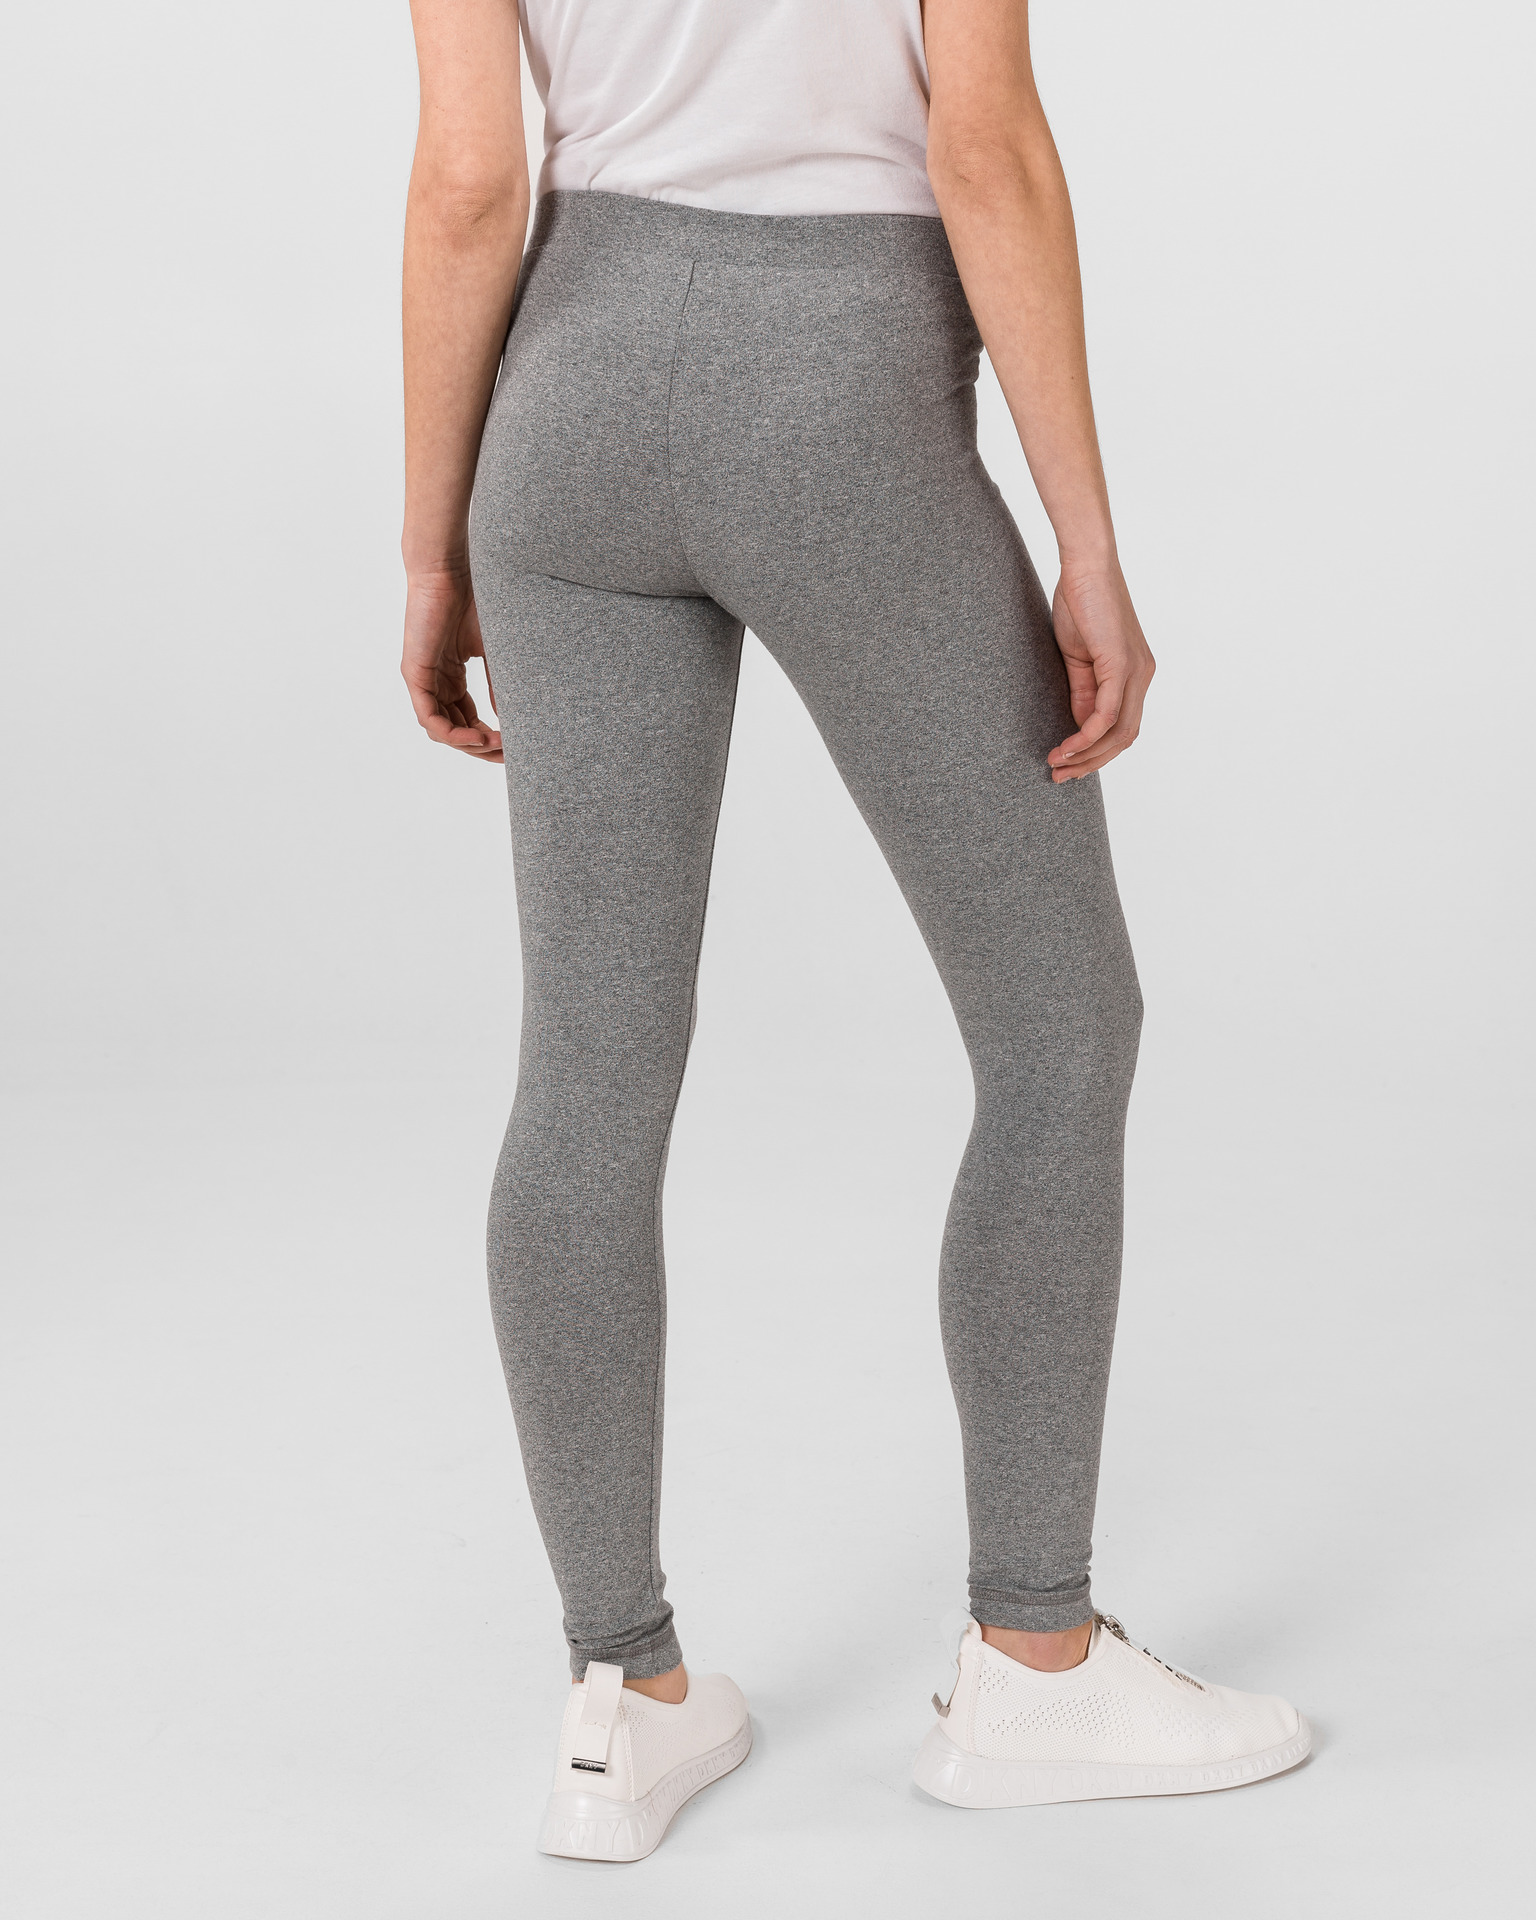 Champion 2 pack leggings in grey and black